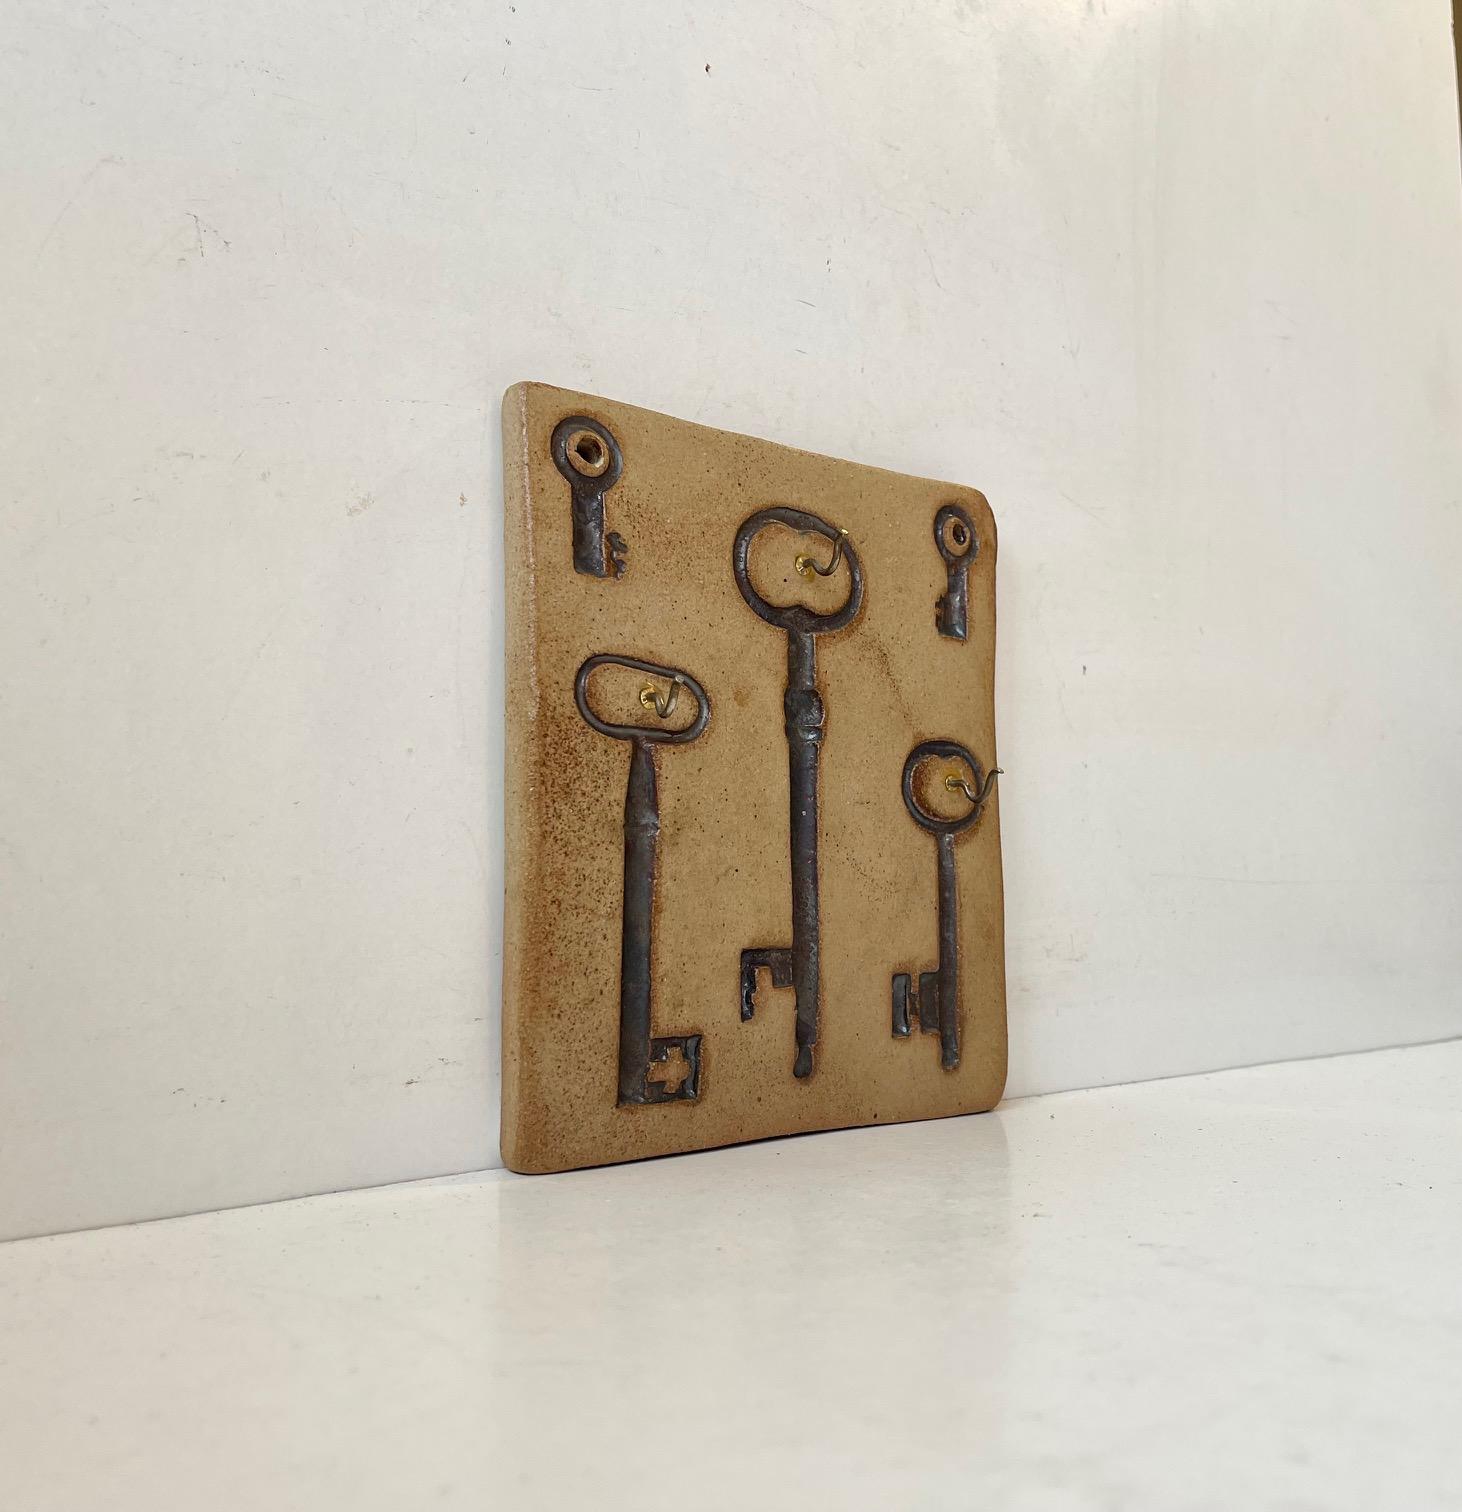 Unusual wall mounted key holder in stoneware. Decorated with impressions of diffrent keys. Designed and made by Ulla Lønow in Denmark circa 1970. Measurements: 16.5 x 15 x 1.5 cm.